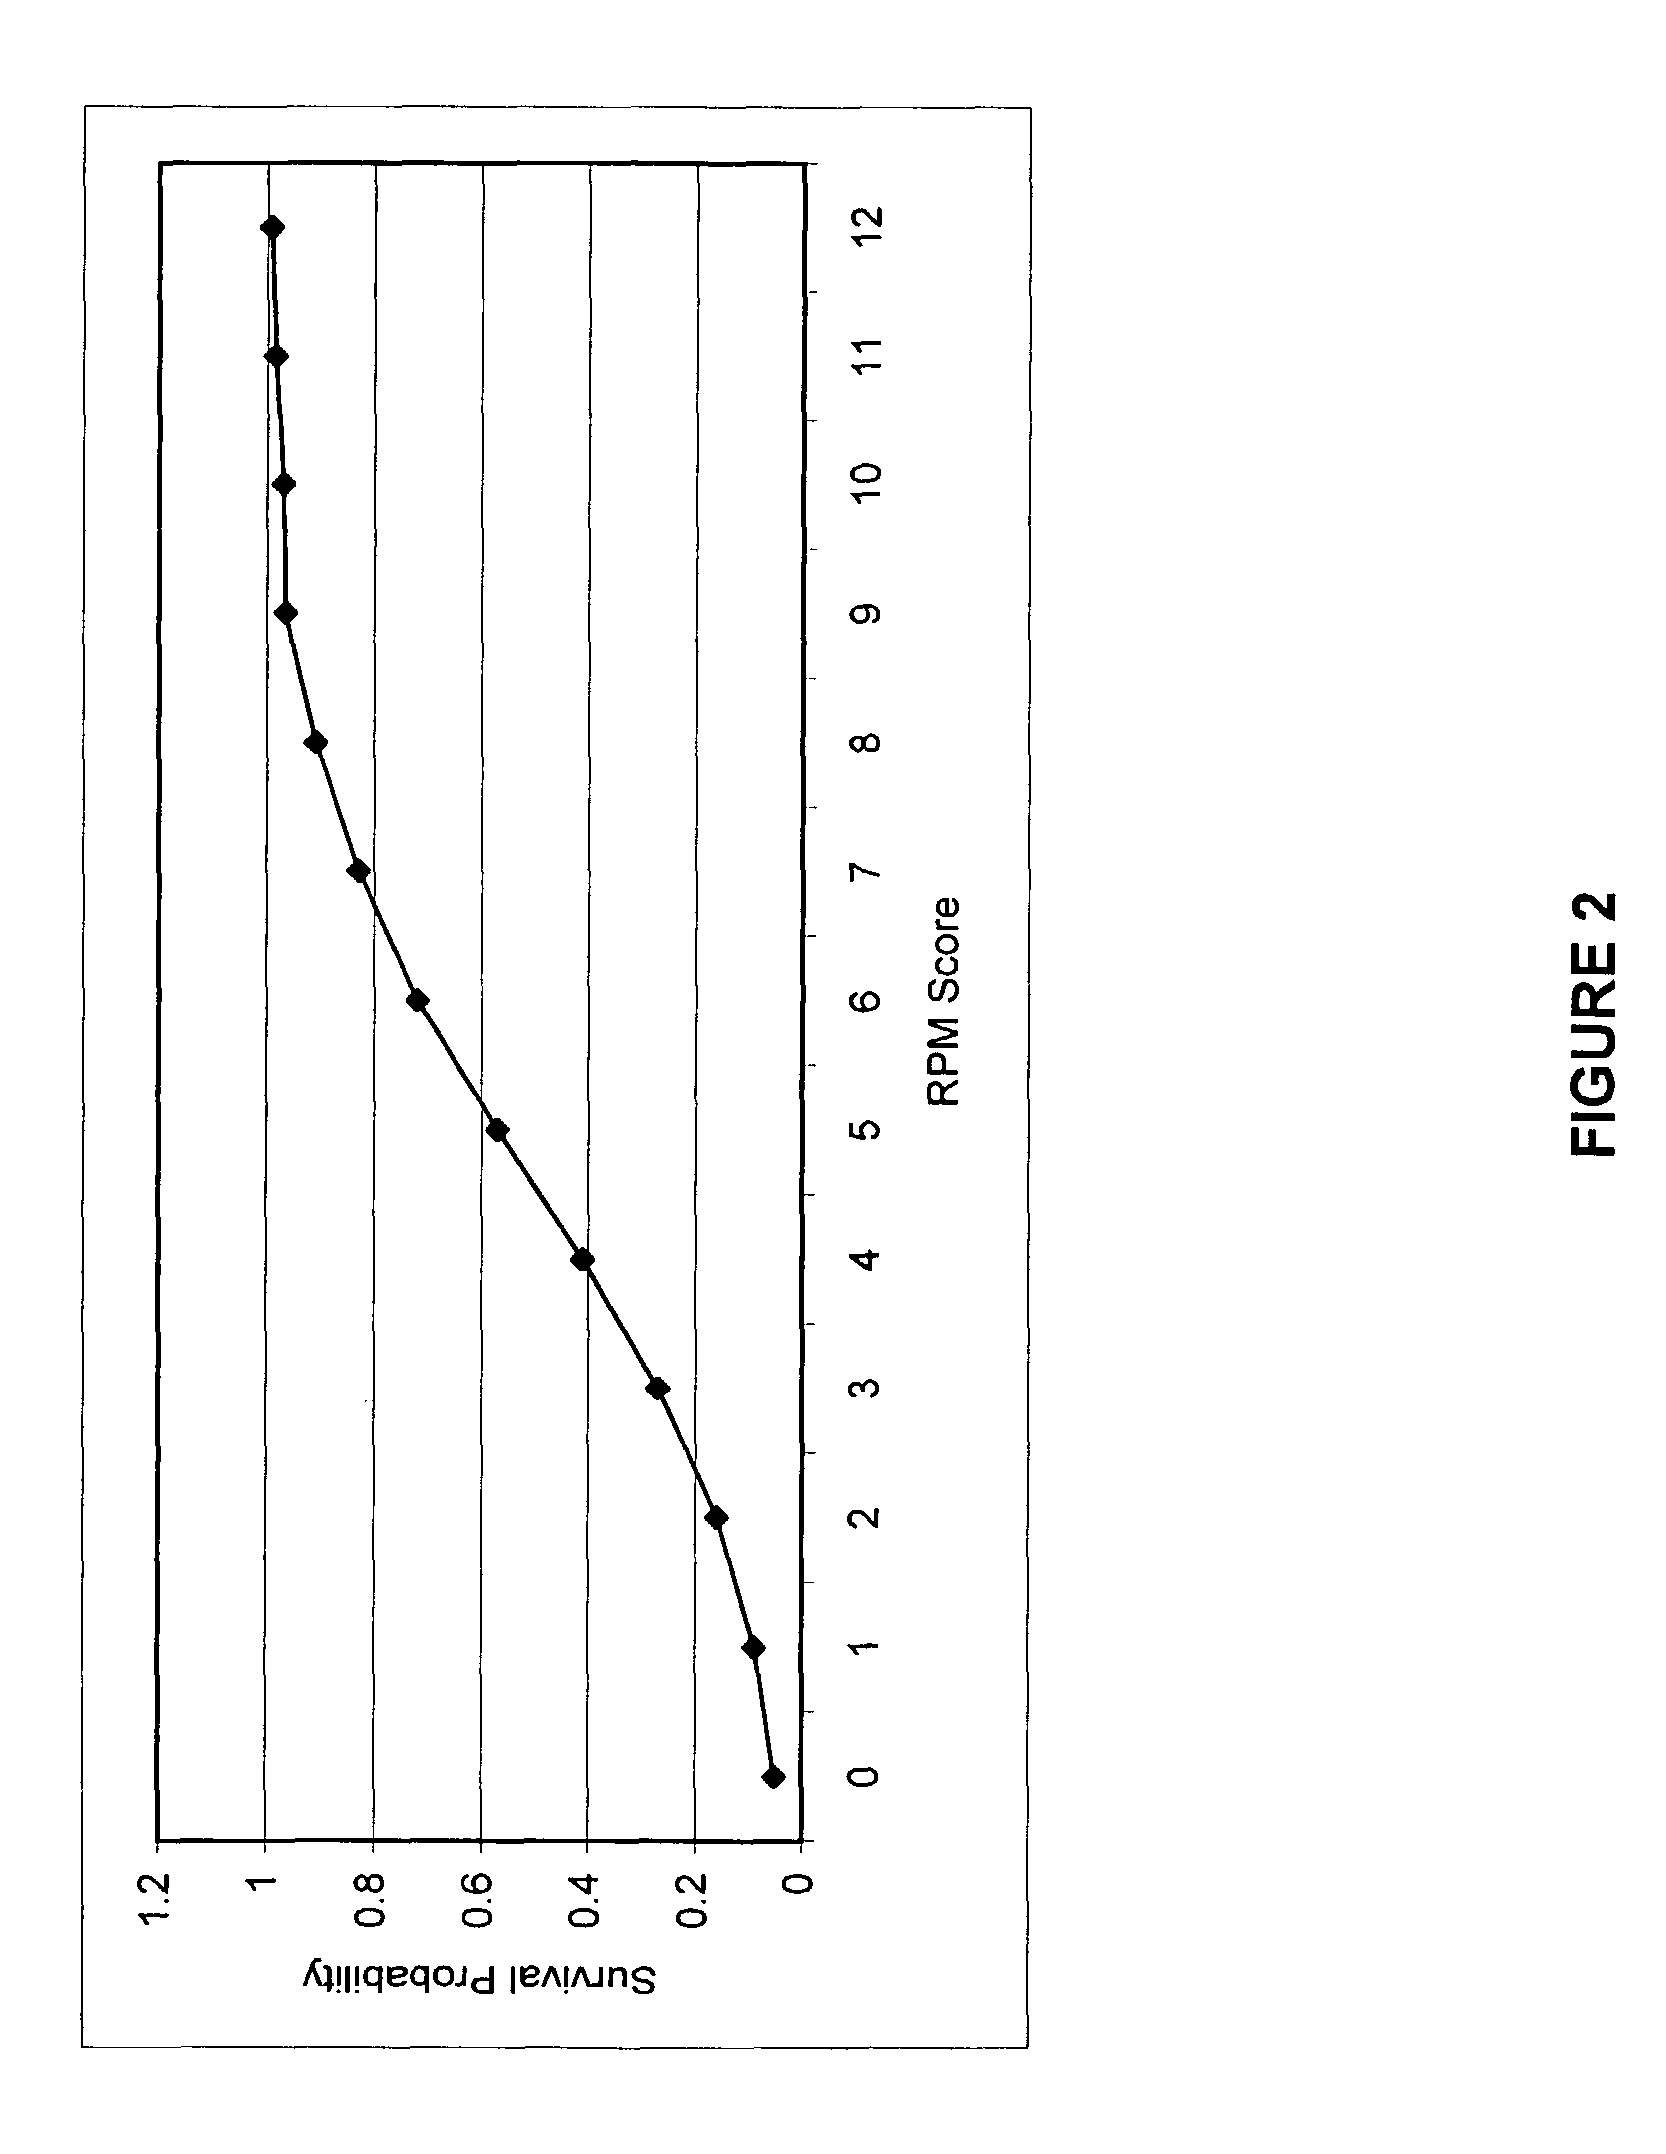 Method and system of mass and multiple casualty triage